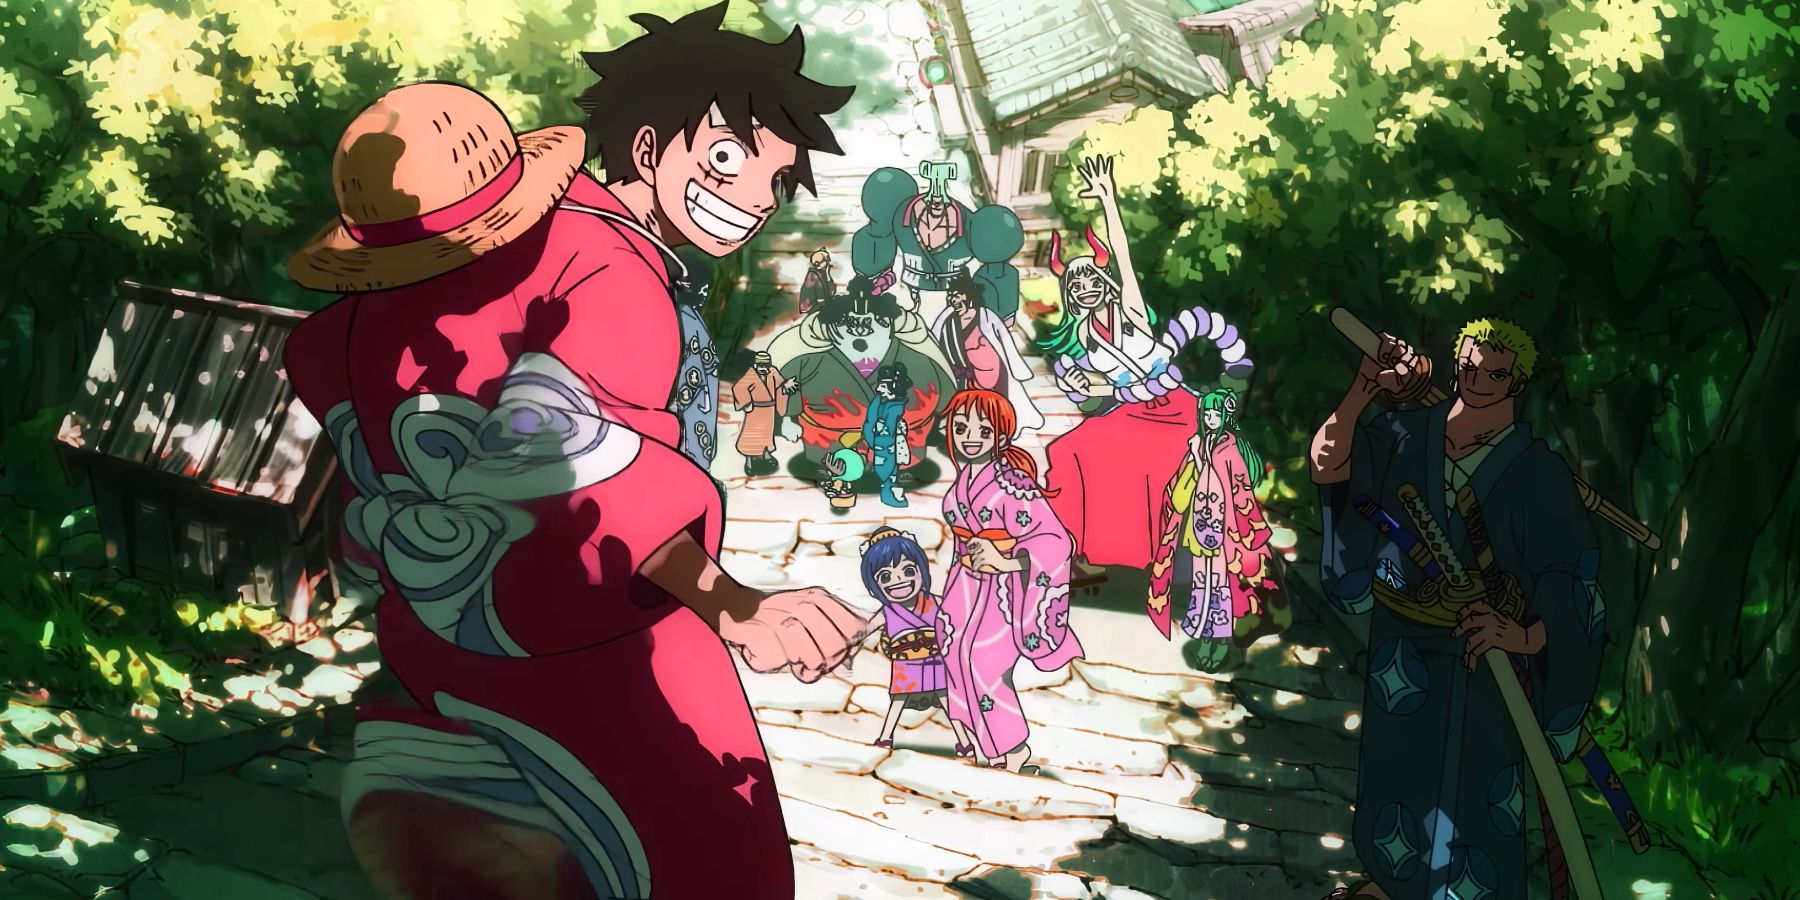 Screenshot from One Piece opening 25 shows Luffy with some of his crew and Wano characters walking down some outside stairs.